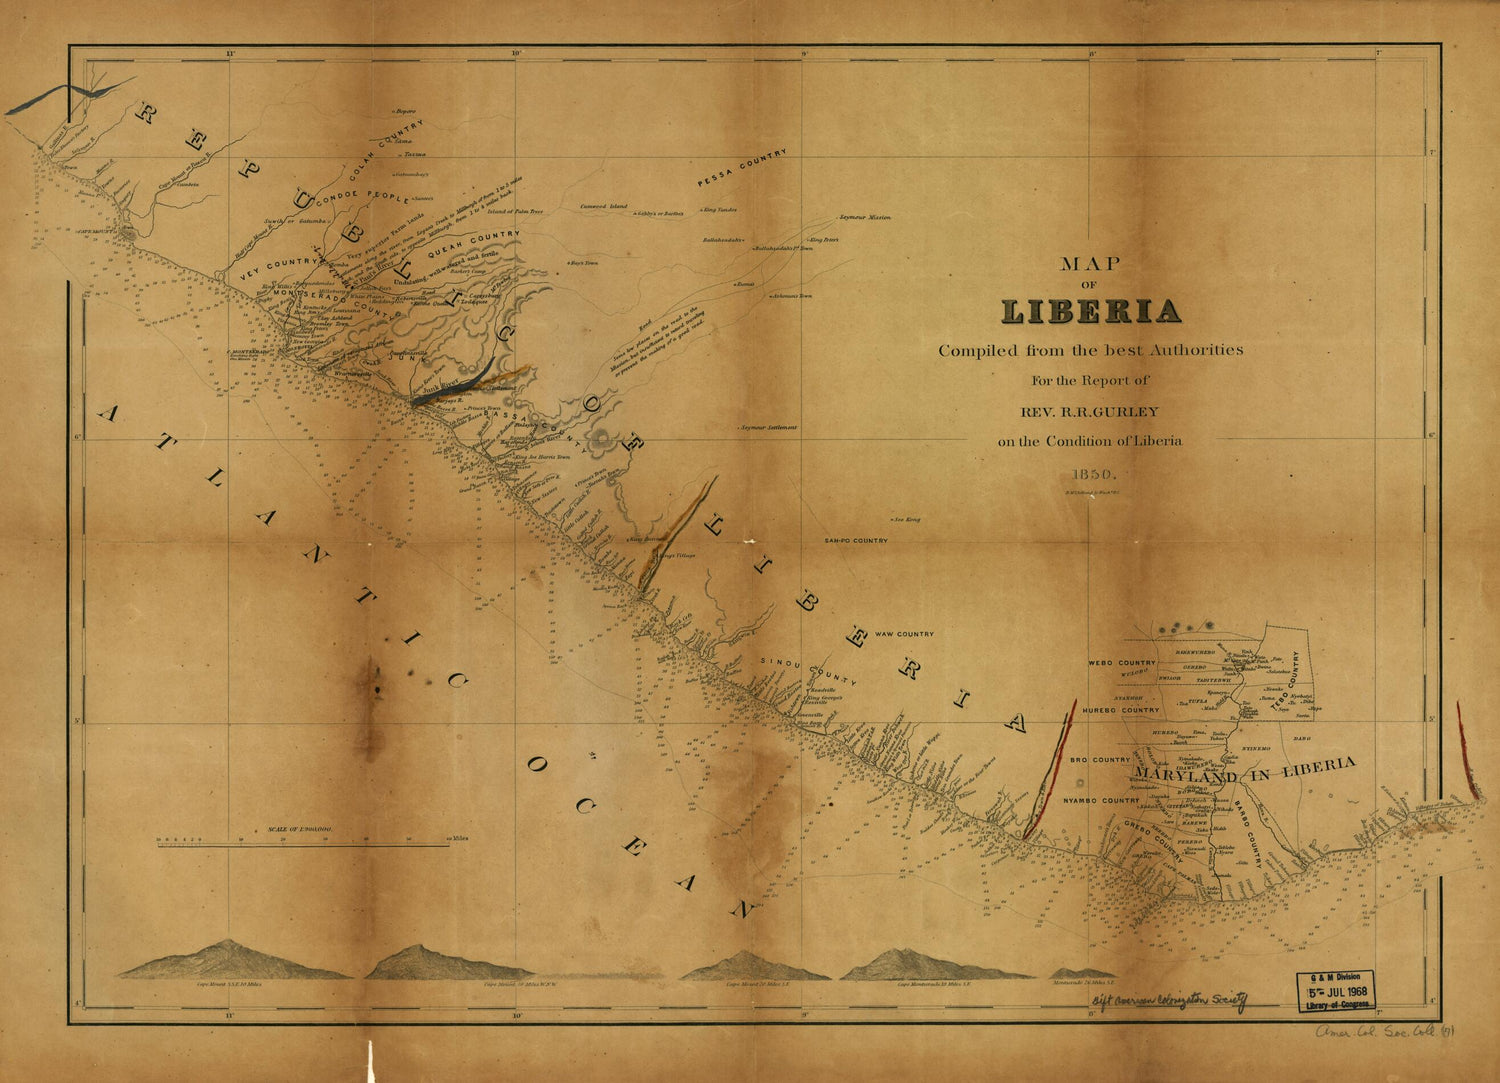 This old map of Map of Liberia from 1850 was created by Ralph Randolph Gurley in 1850